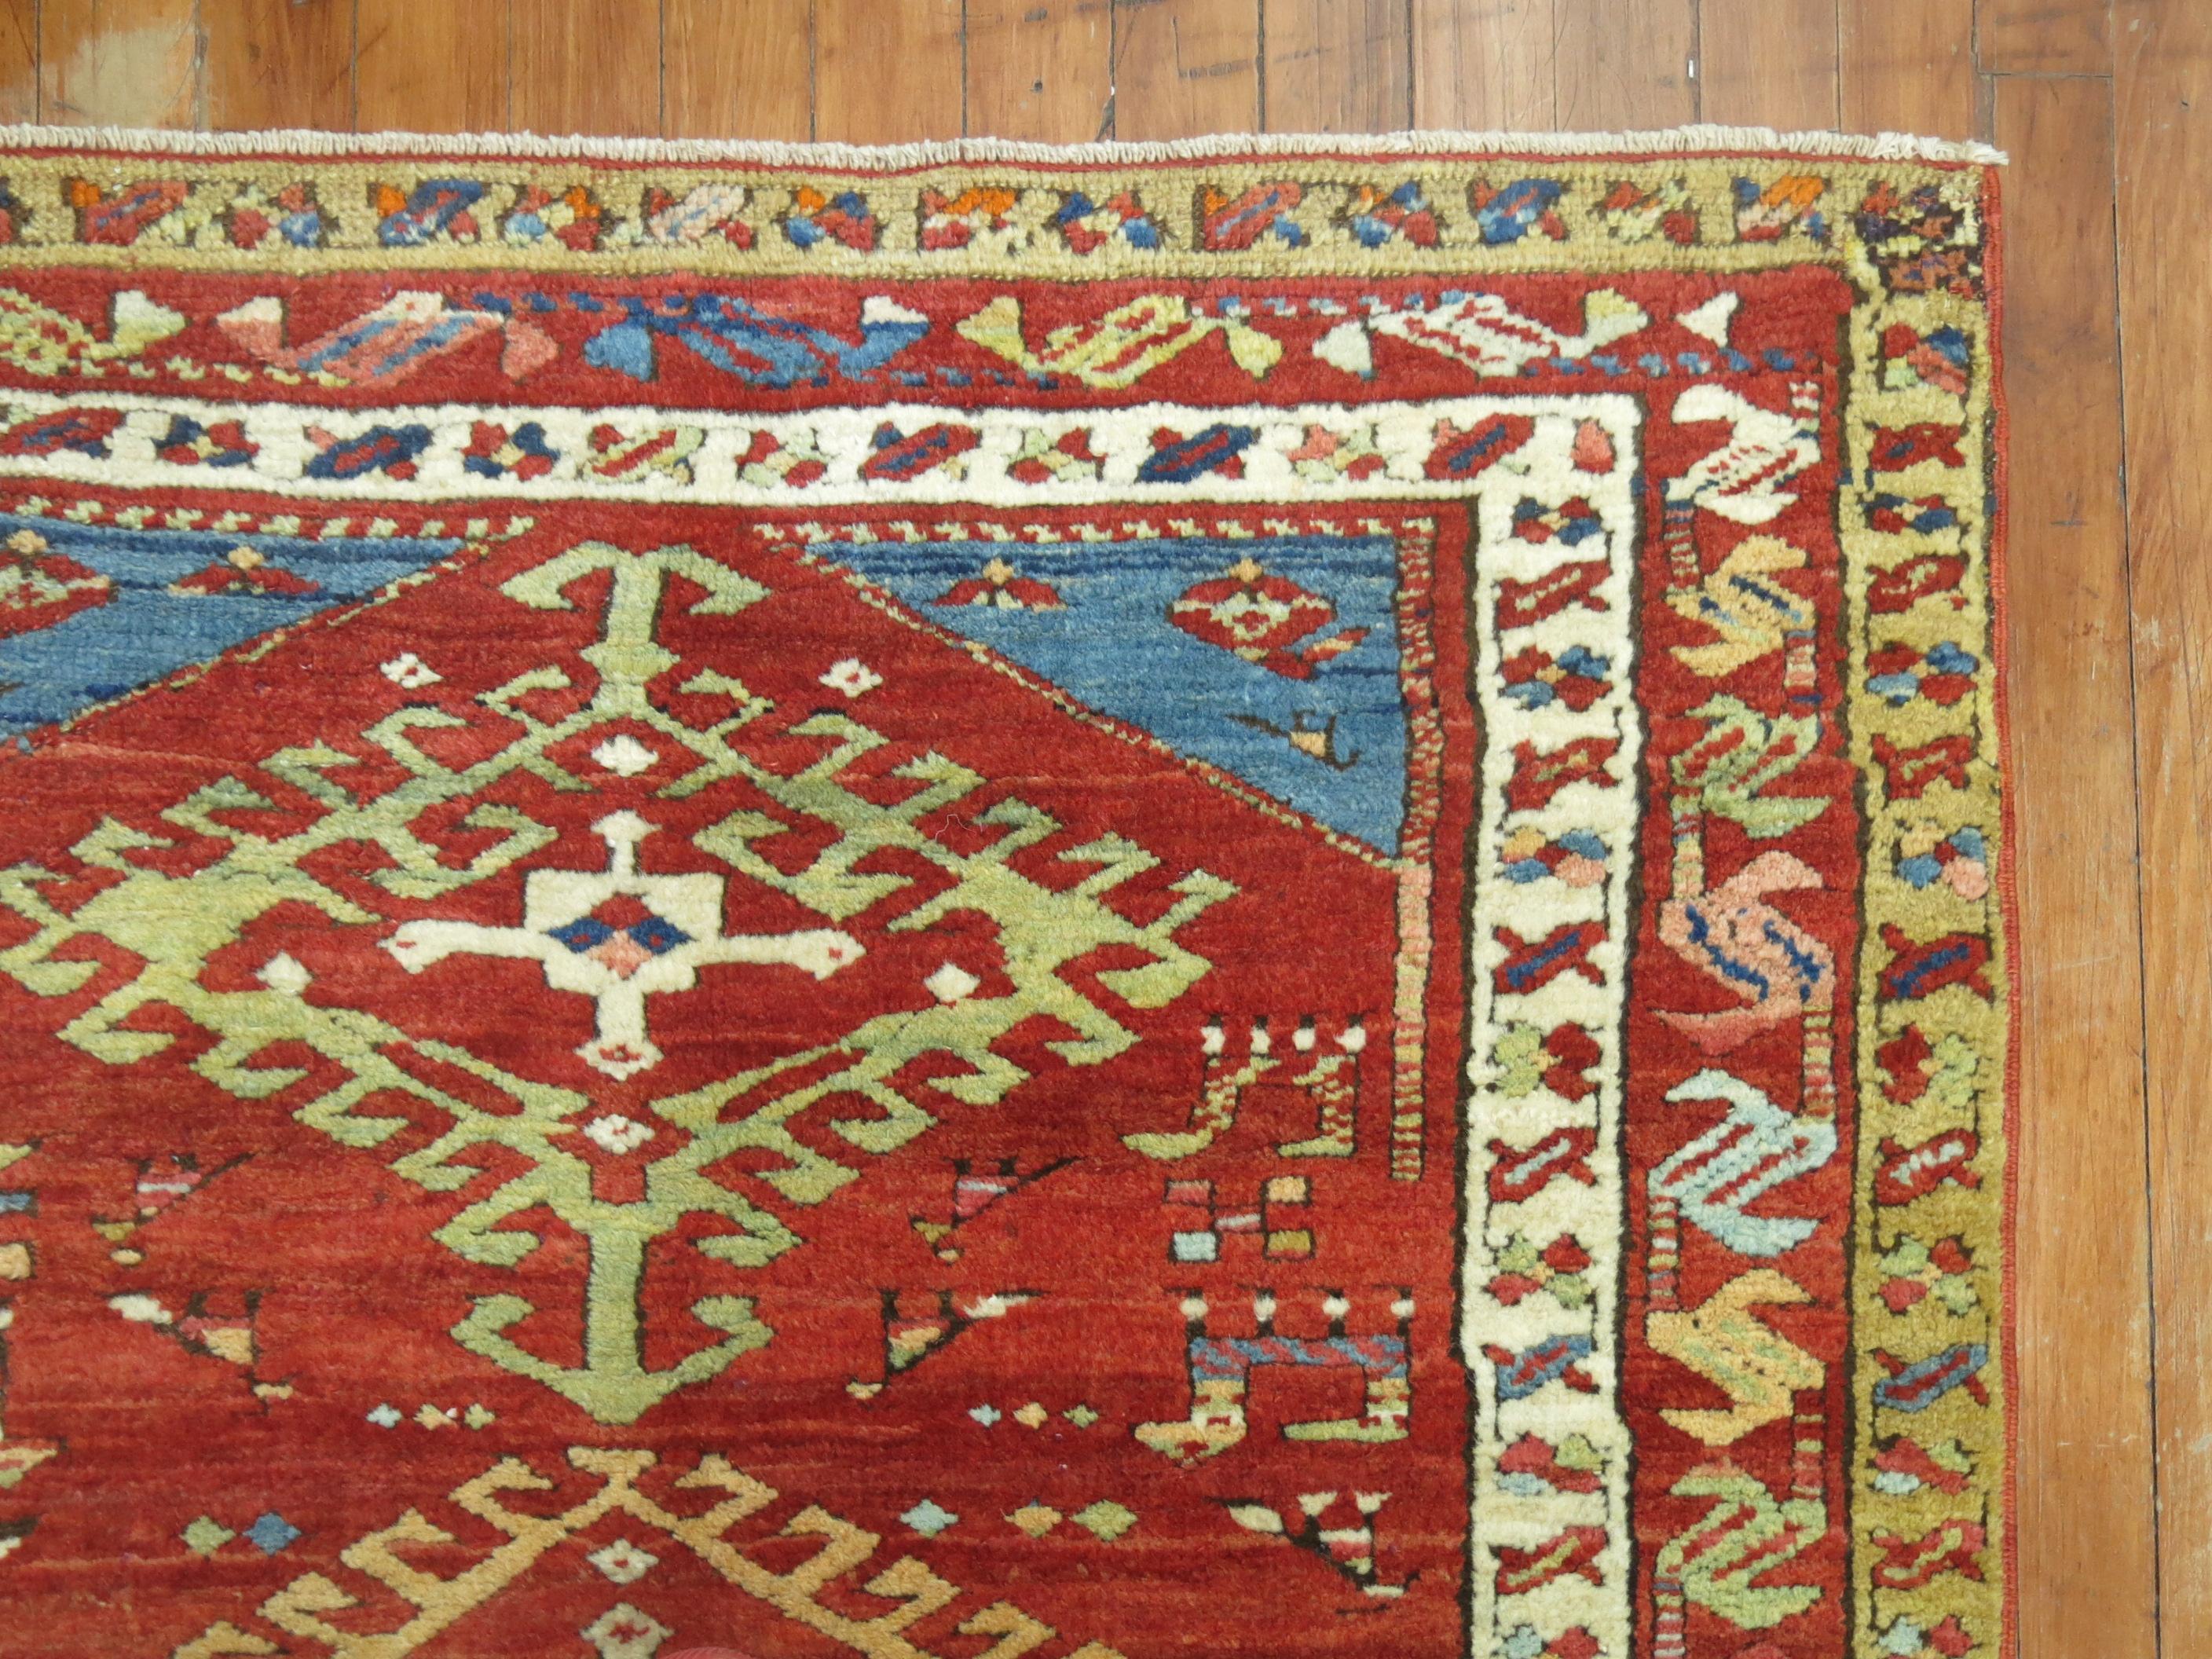 Full pile geometric antique northwest Persian runner with a red field bodied by colorful medallions, multiple borders and French blue corner spandrels, circa 1920.

Measures: 3'6” x 9'6”.